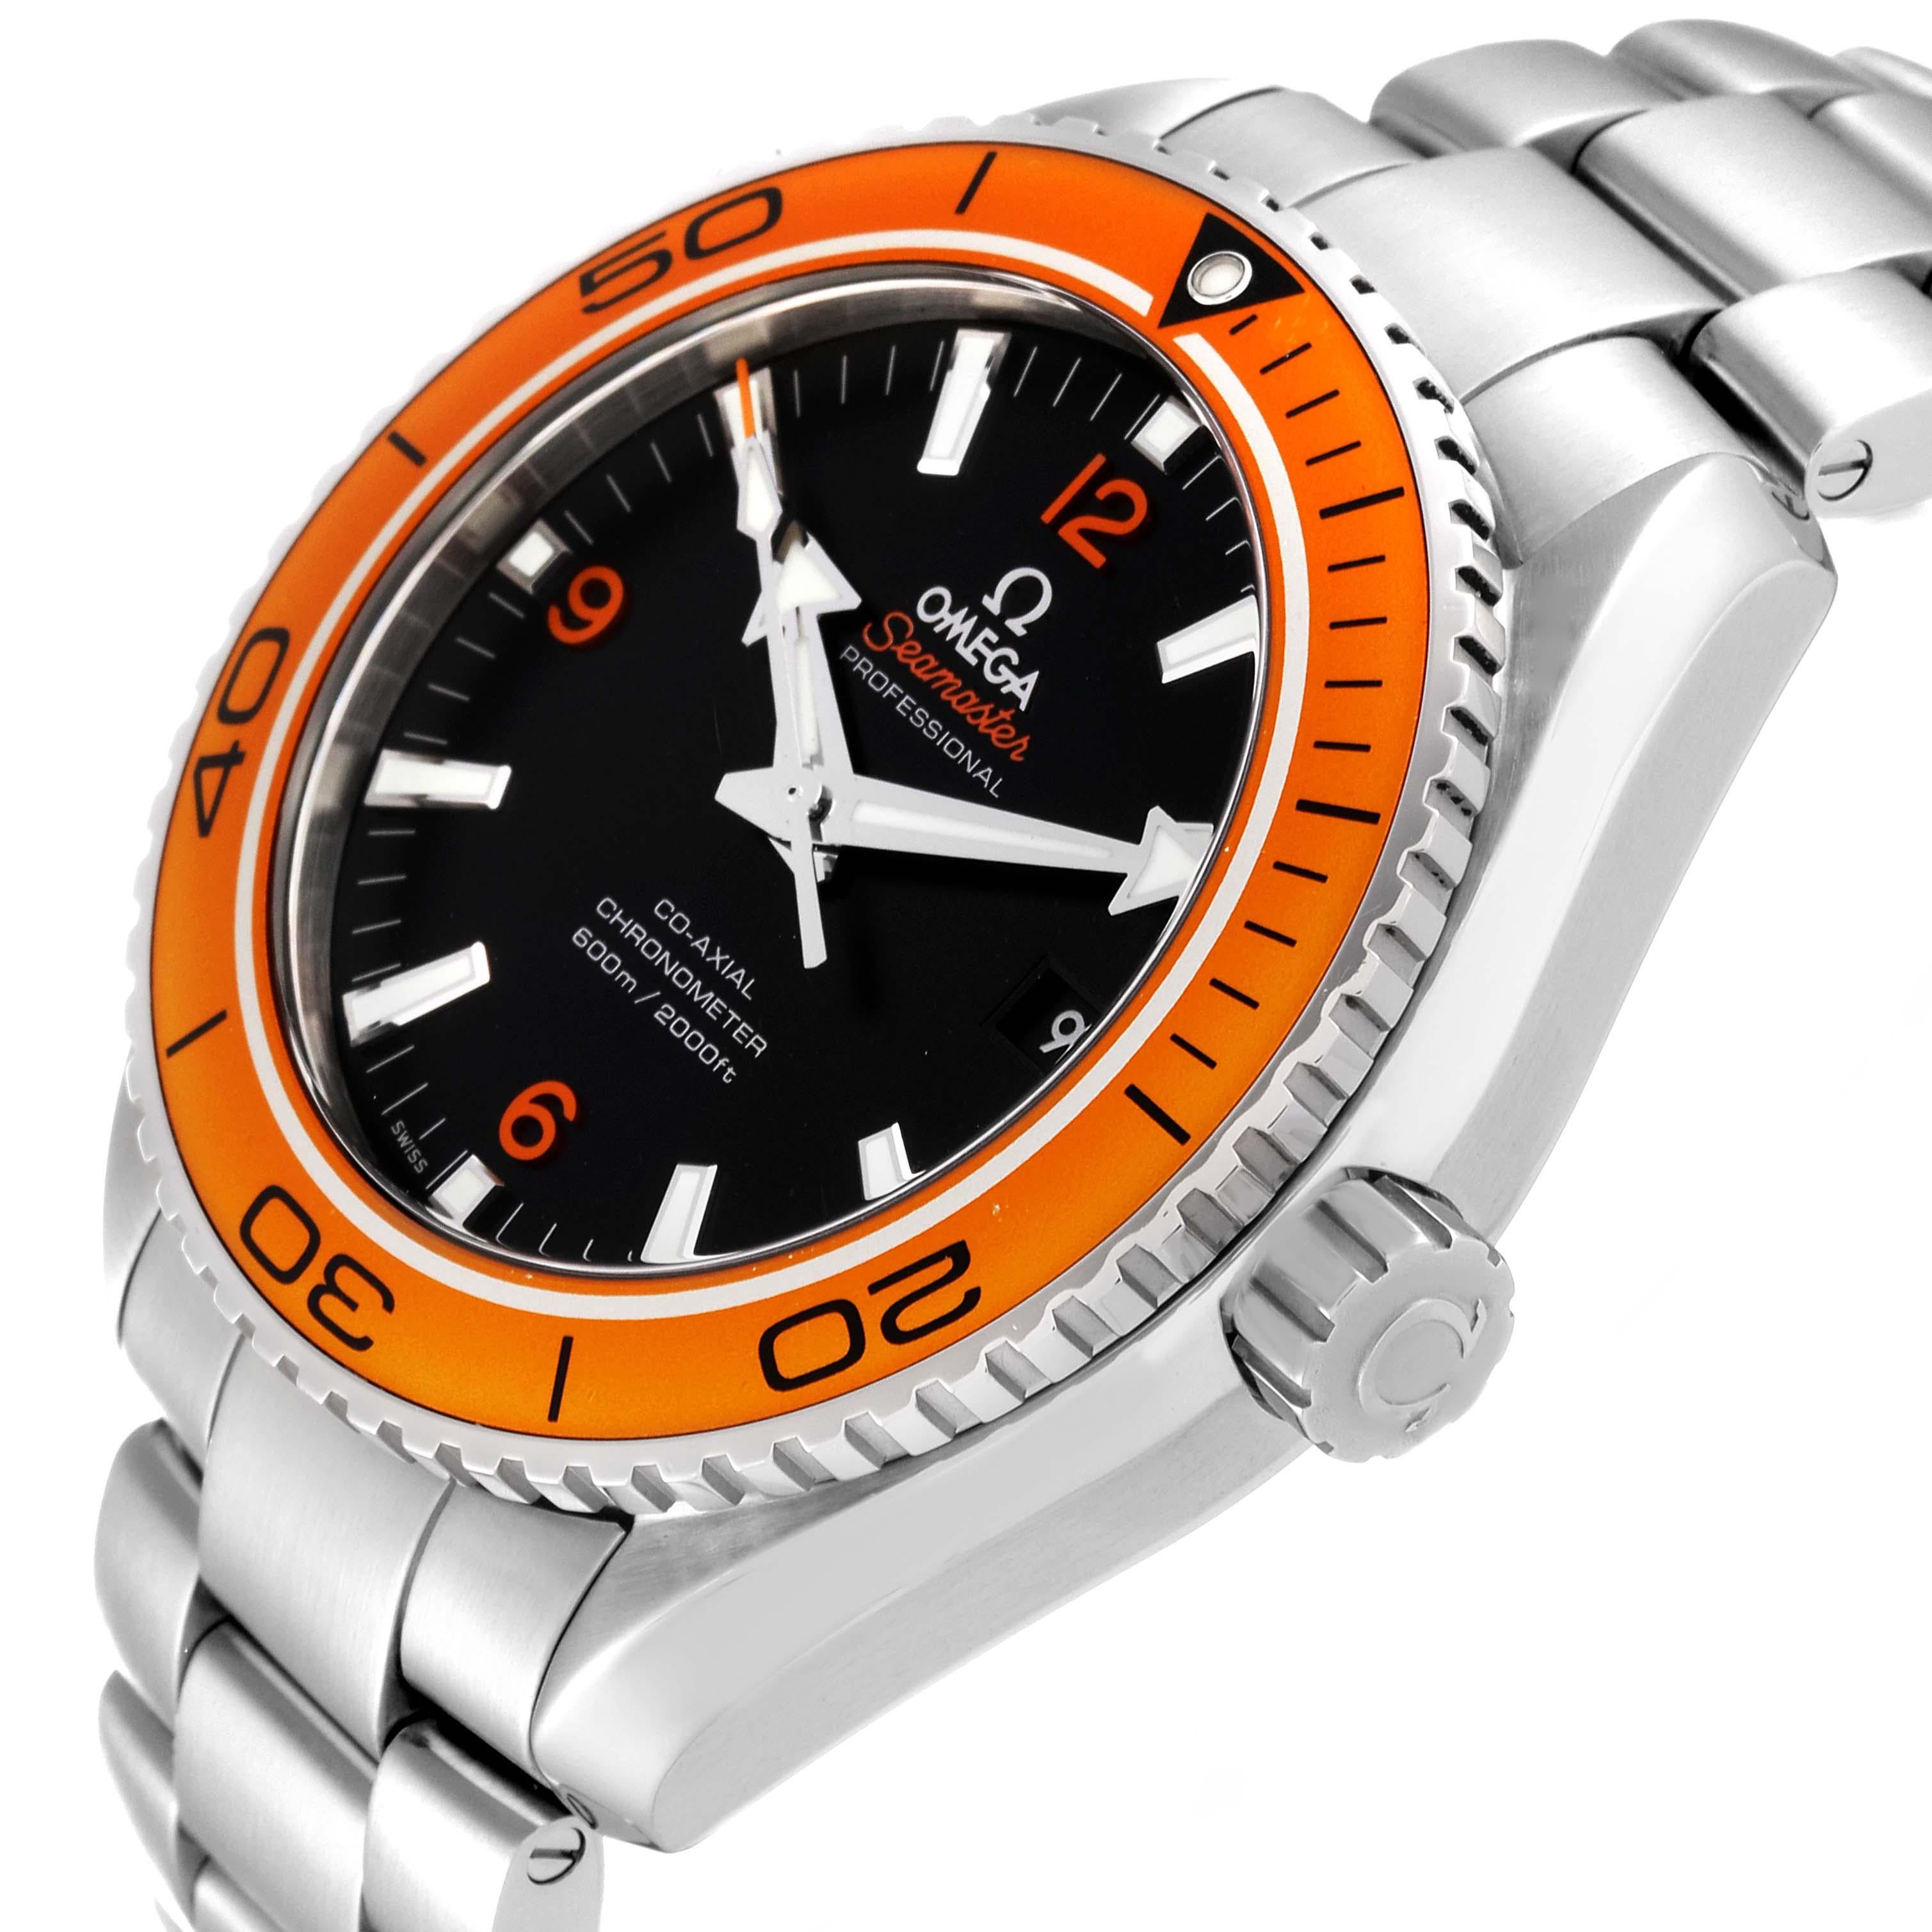 Omega Seamaster Planet Ocean Steel Mens Watch 232.30.42.21.01.002 In Excellent Condition For Sale In Atlanta, GA